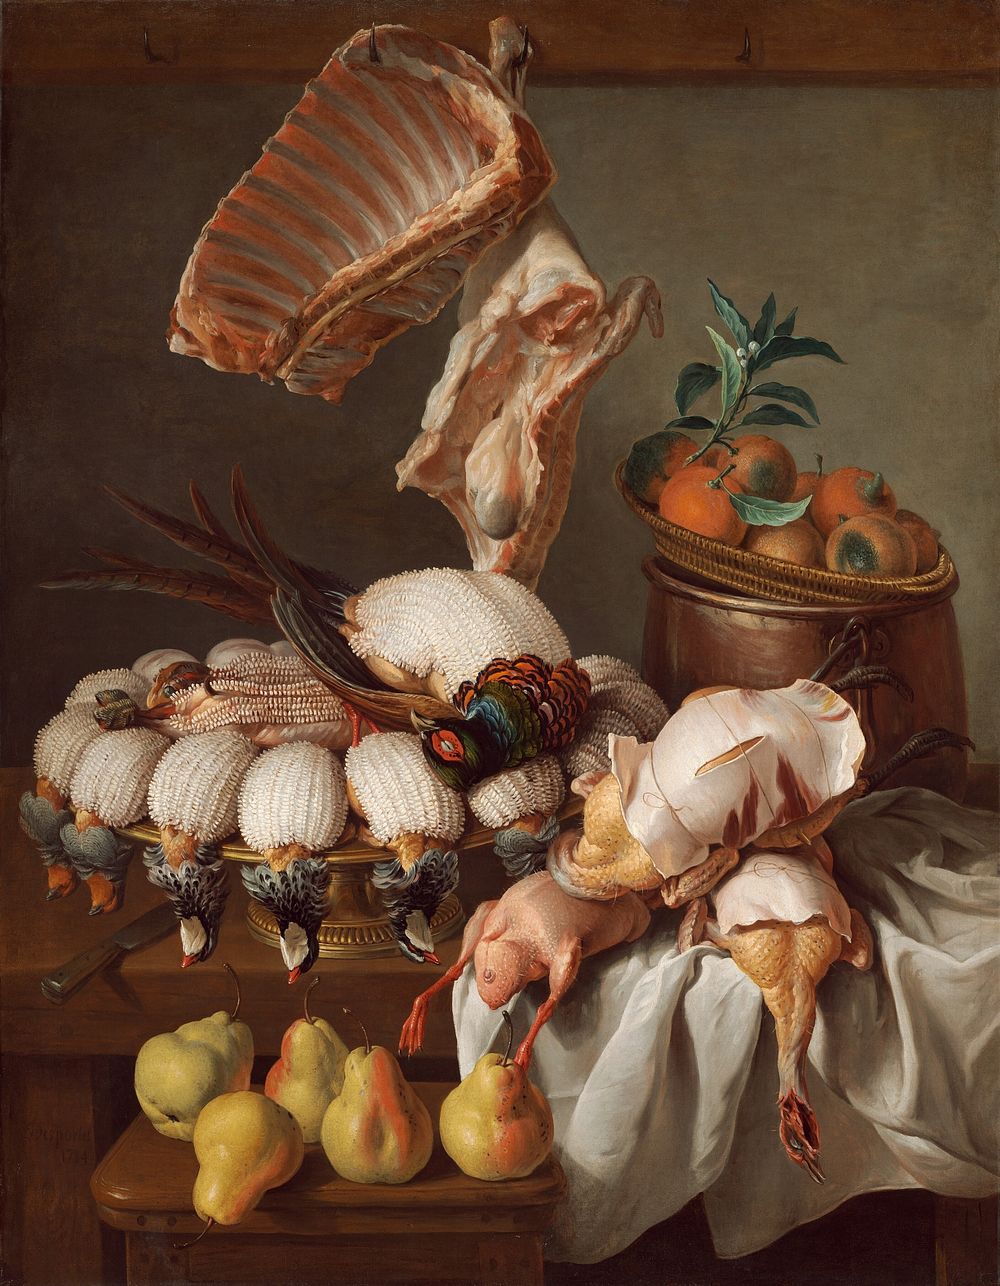 Still Life with Dressed Game, Meat, and Fruit (1734) by Alexandre&ndash;Fran&ccedil;ois Desportes.  